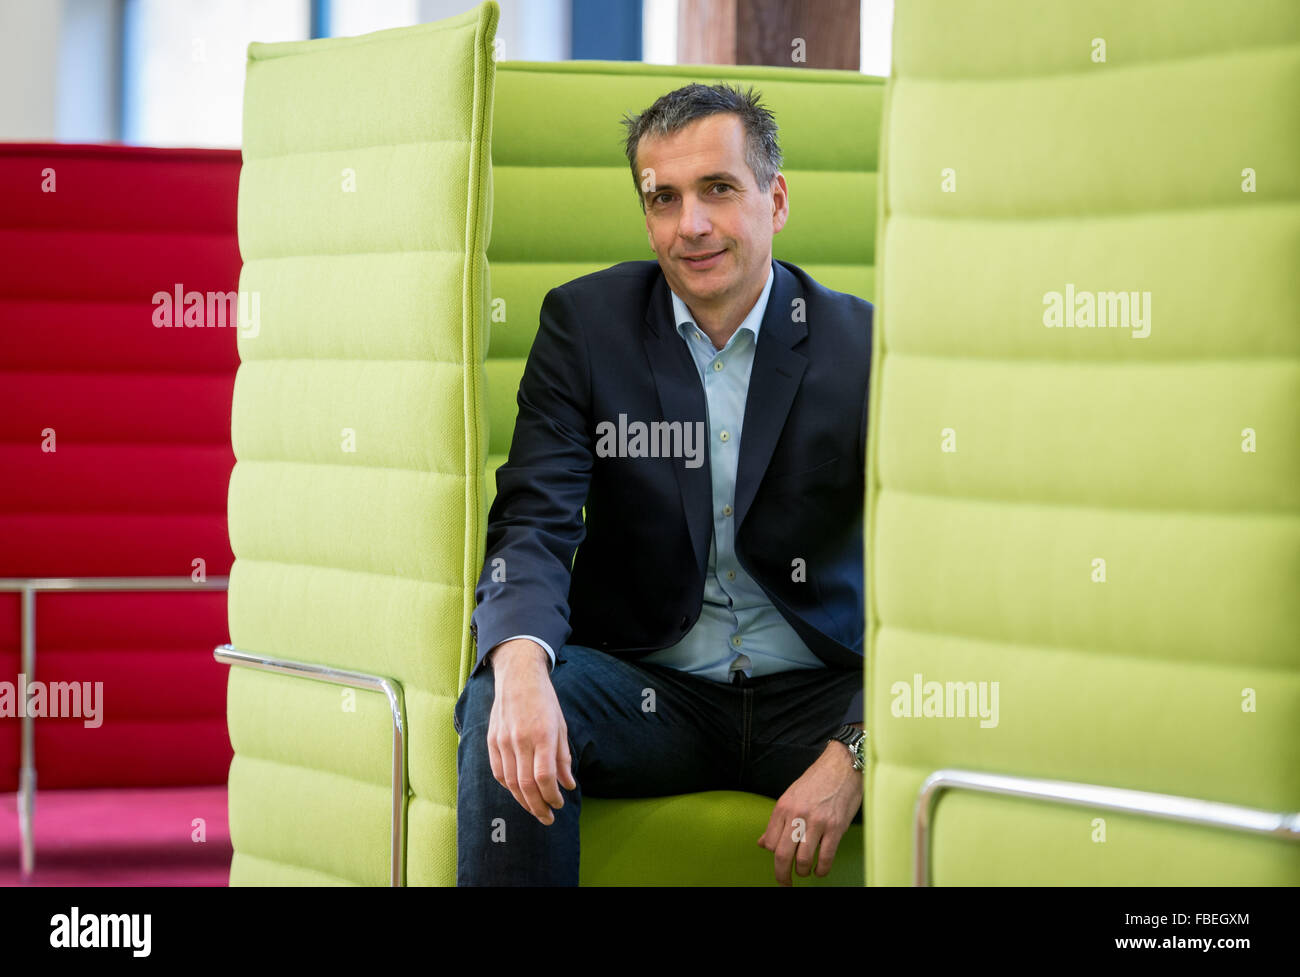 Chairman of the management board of chocolate manufacturer Ritter Sport, Andreas Ronken, sits in a seating area as he is pictured at the company headquarter in Waldenbuch, Germany, 8 December 2015. Photo: Daniel Maurer/dpa Stock Photo